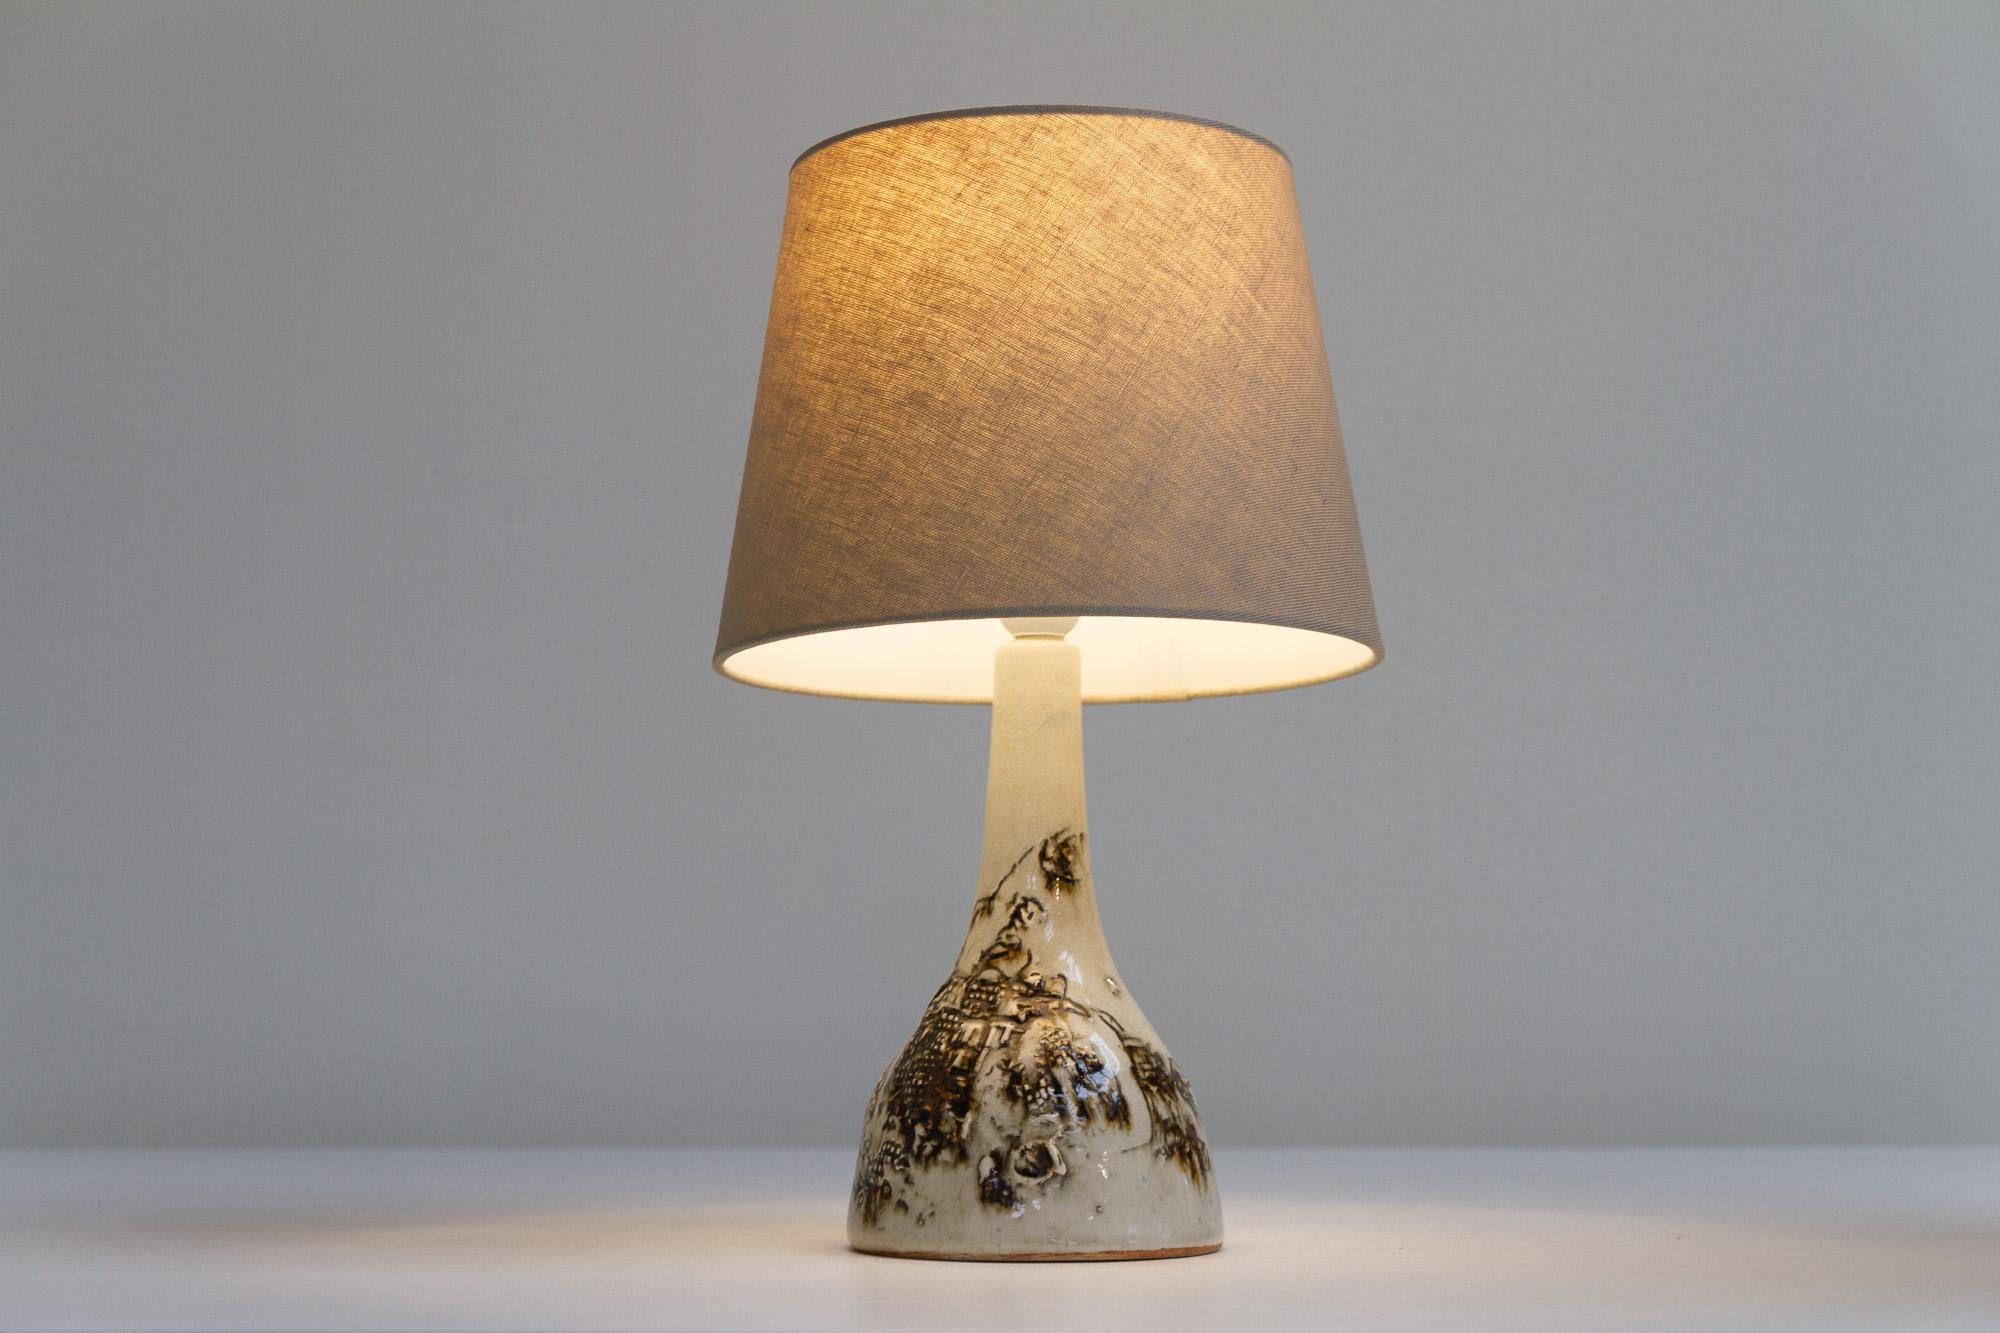 Vintage Danish Brutalist Ceramic Table Lamp by Conny Walther, 1960s For Sale 5